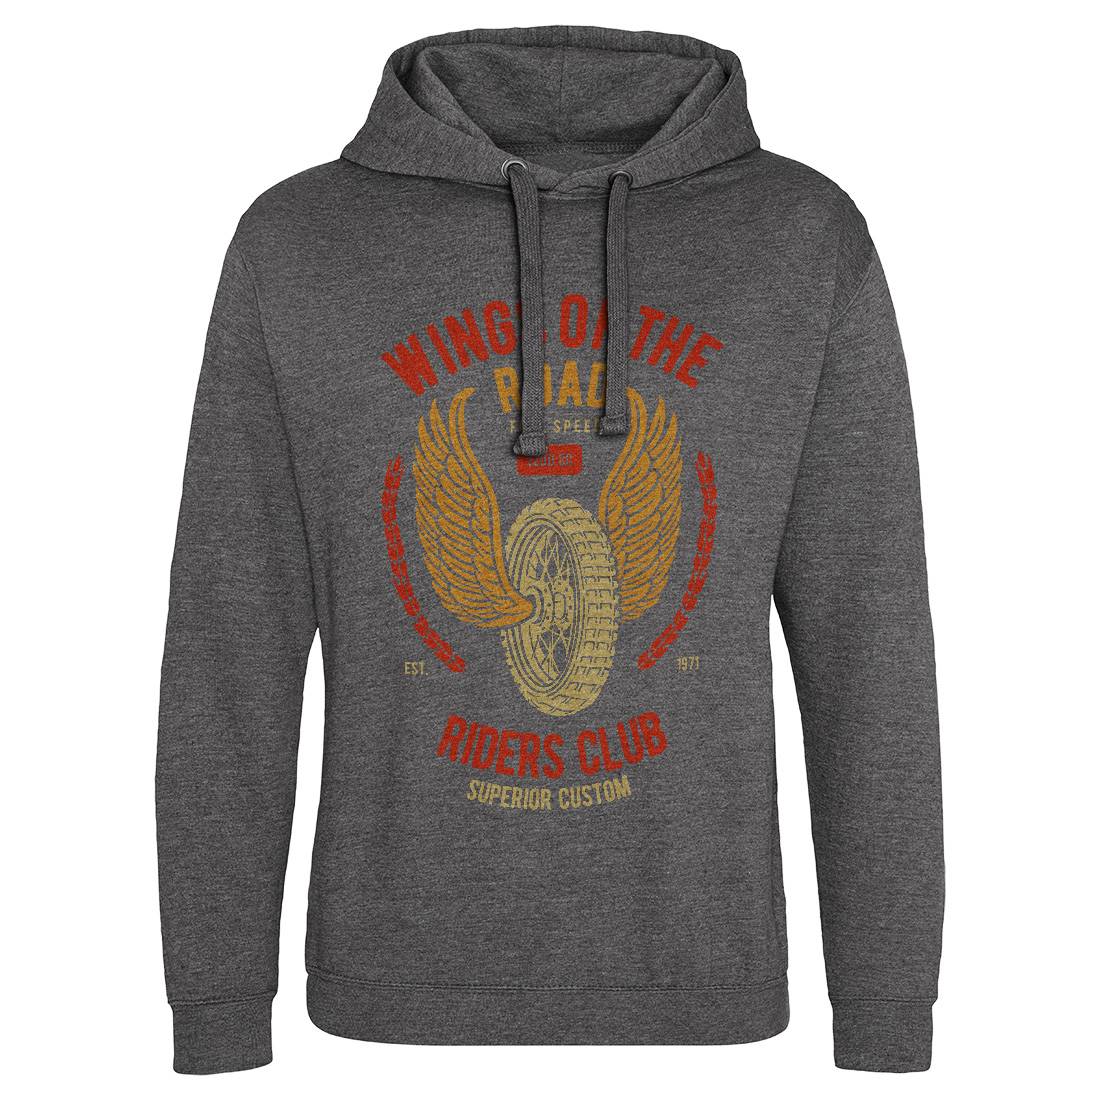 Wings Of The Road Mens Hoodie Without Pocket Motorcycles B273